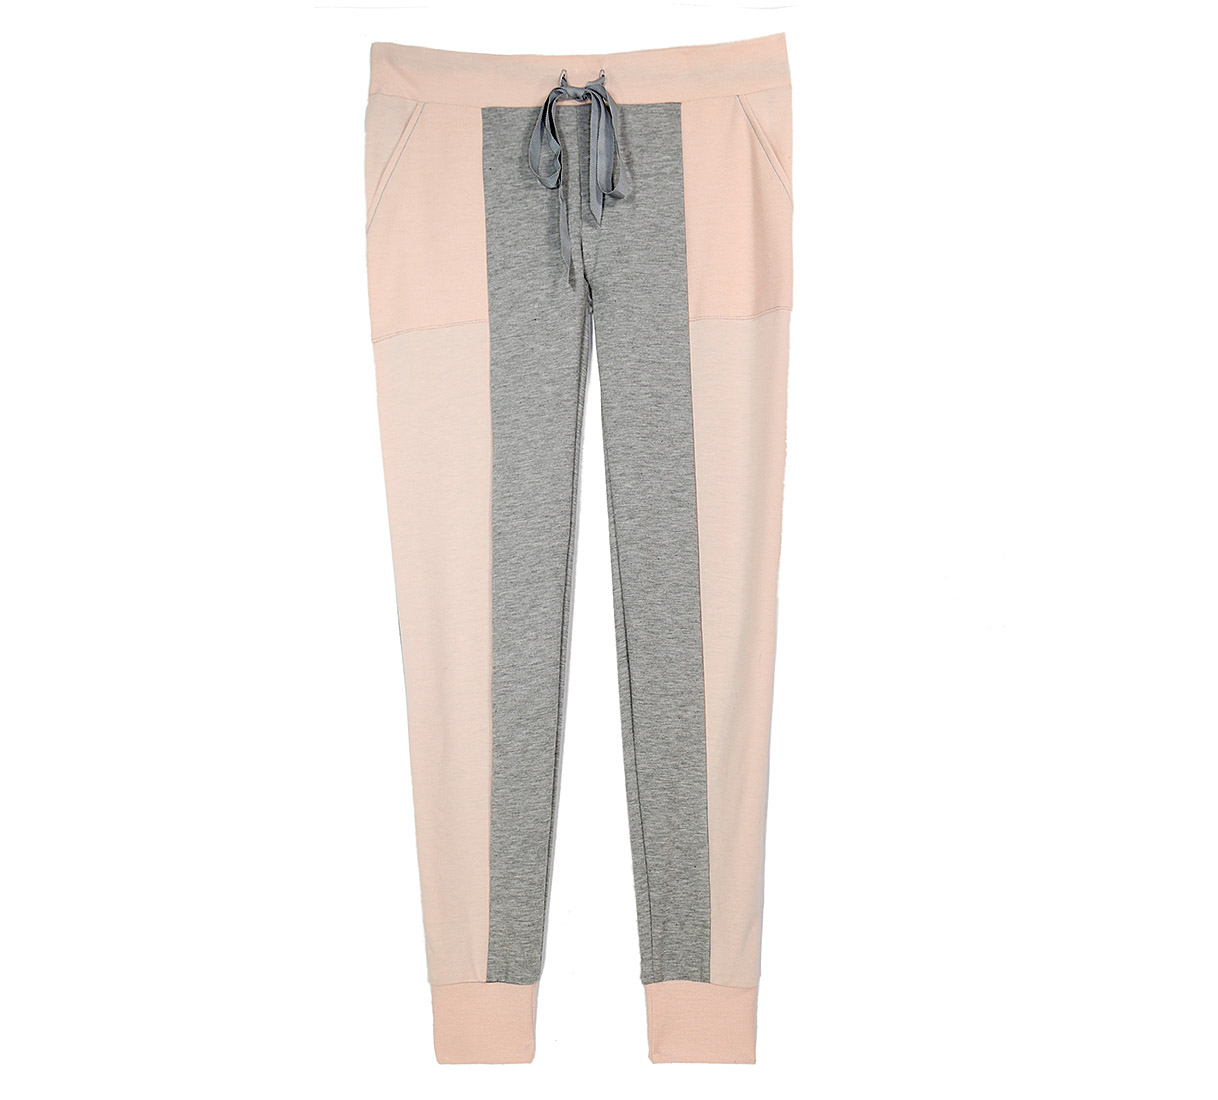 Make a Pass Heather Grey Pink Jogger | Color Blocked Warmups | Luxury Athleisure | Between the Sheets Loungewear